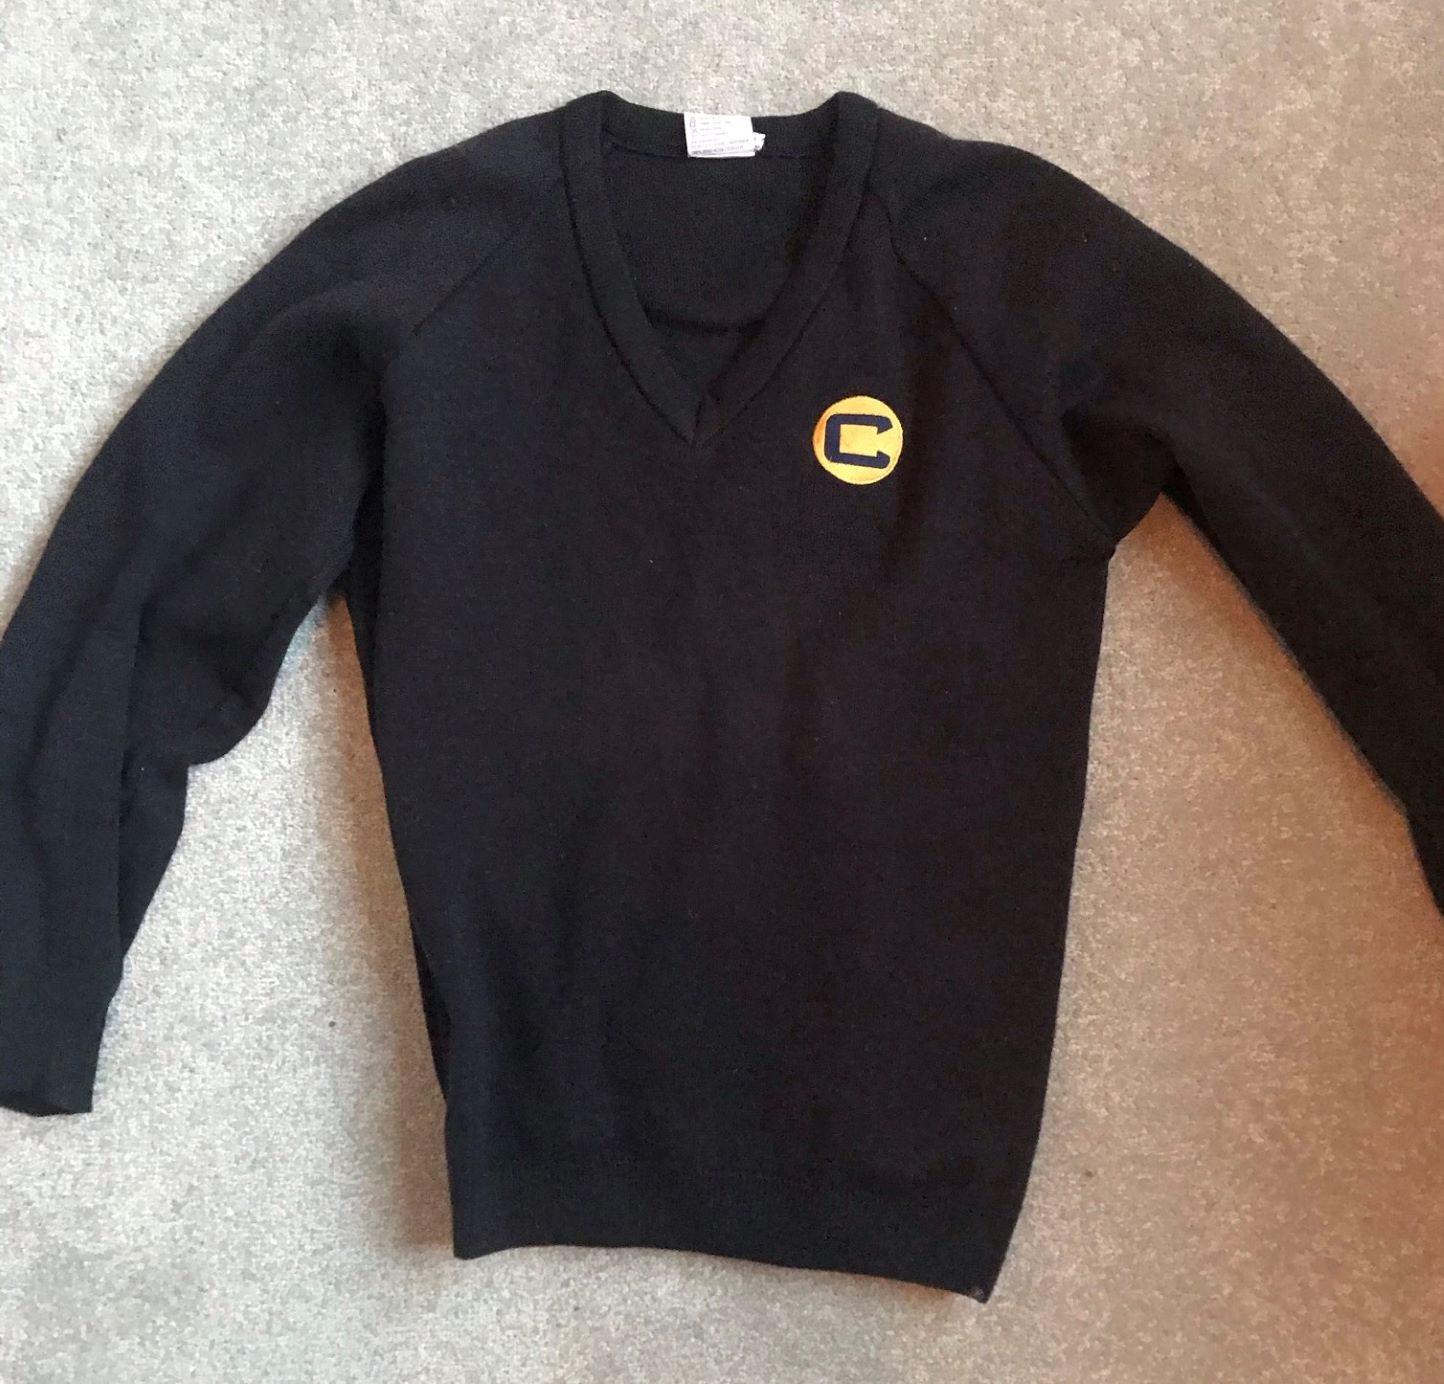 Charter North Jumper: Size 38 marked